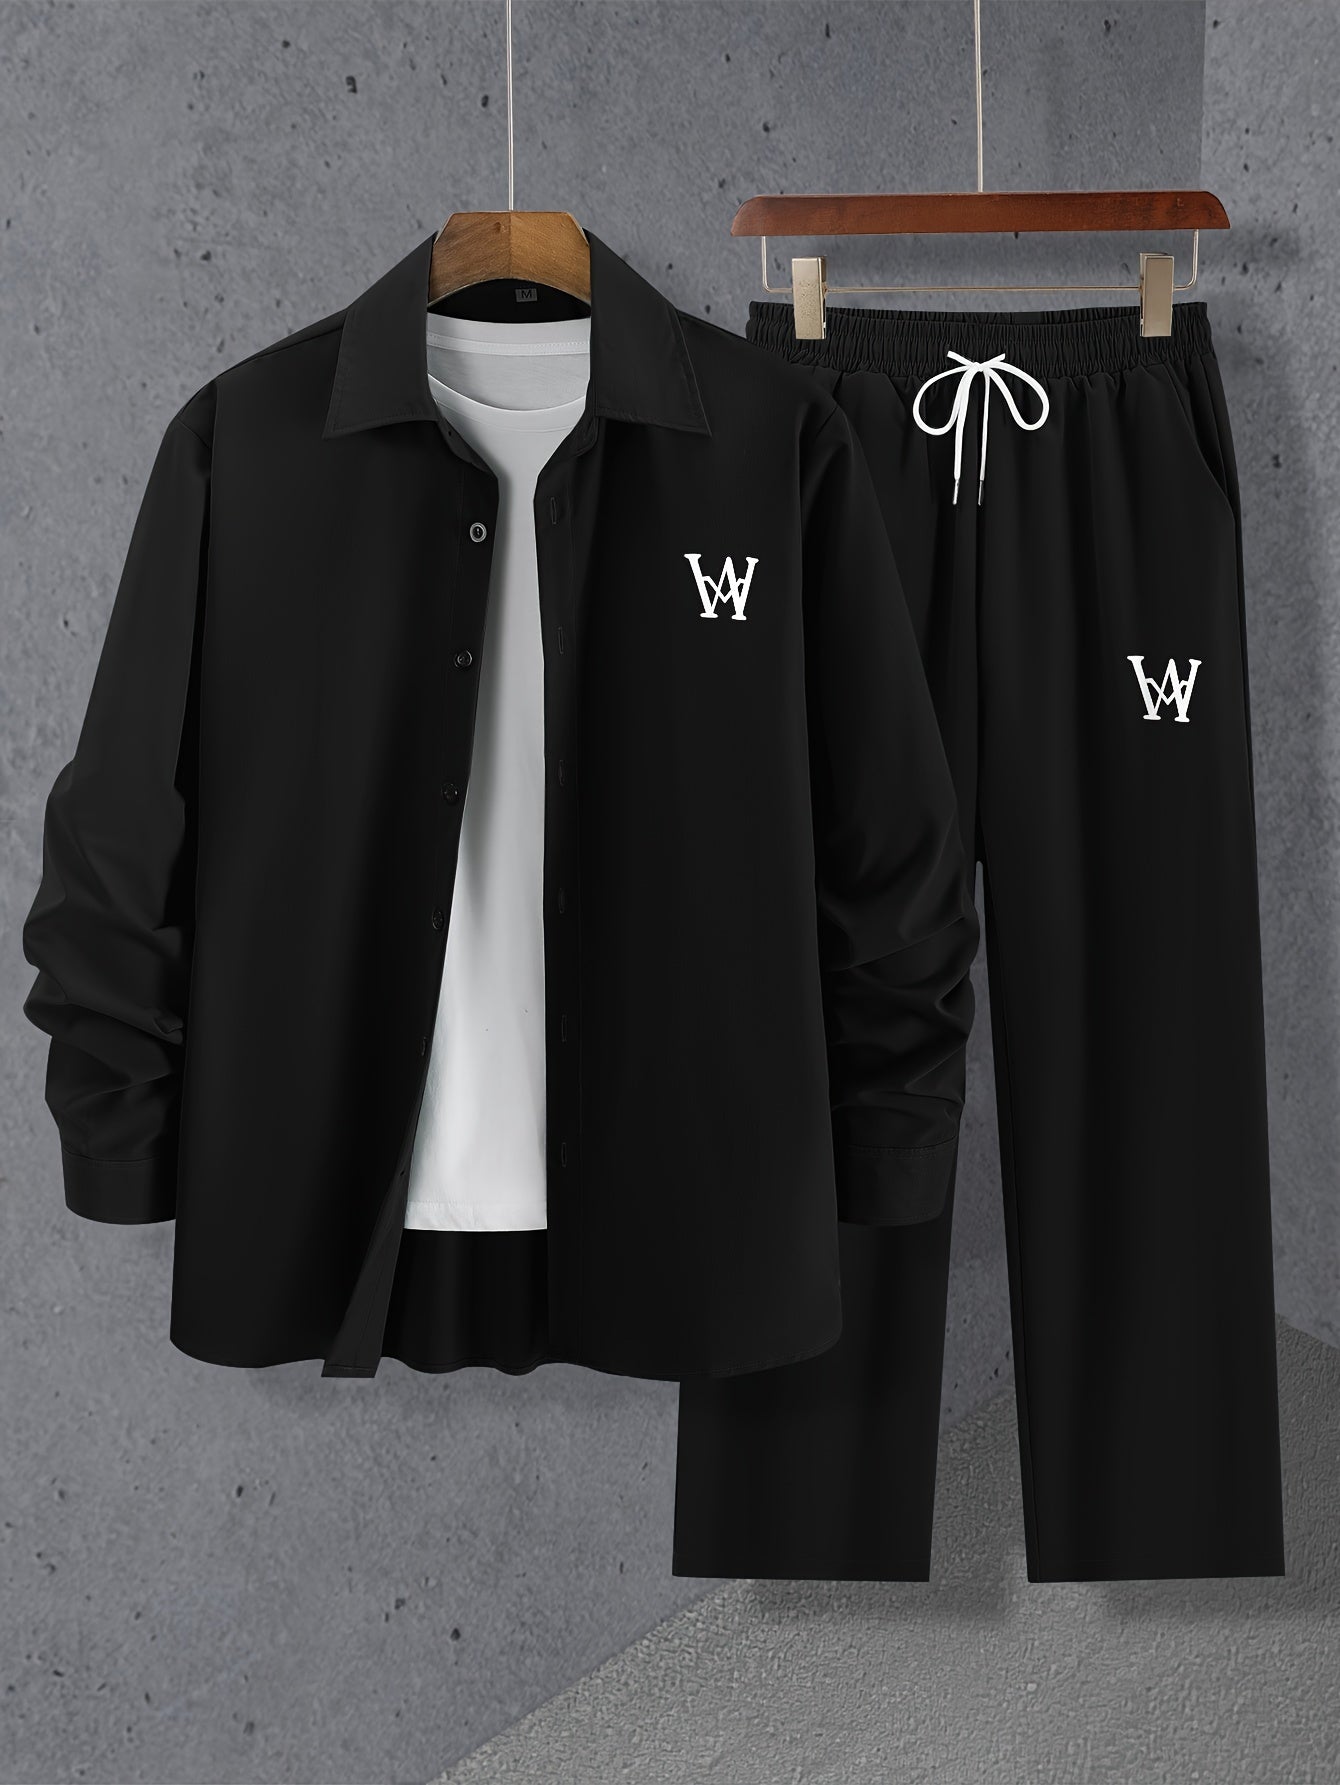 Men's 2Pcs Outfits, Casual Lapel Button Up Long Sleeve Shirt And Drawstring Pants Set For Winter Fall, Men's Clothing For Daily Leisure Vacation Resorts